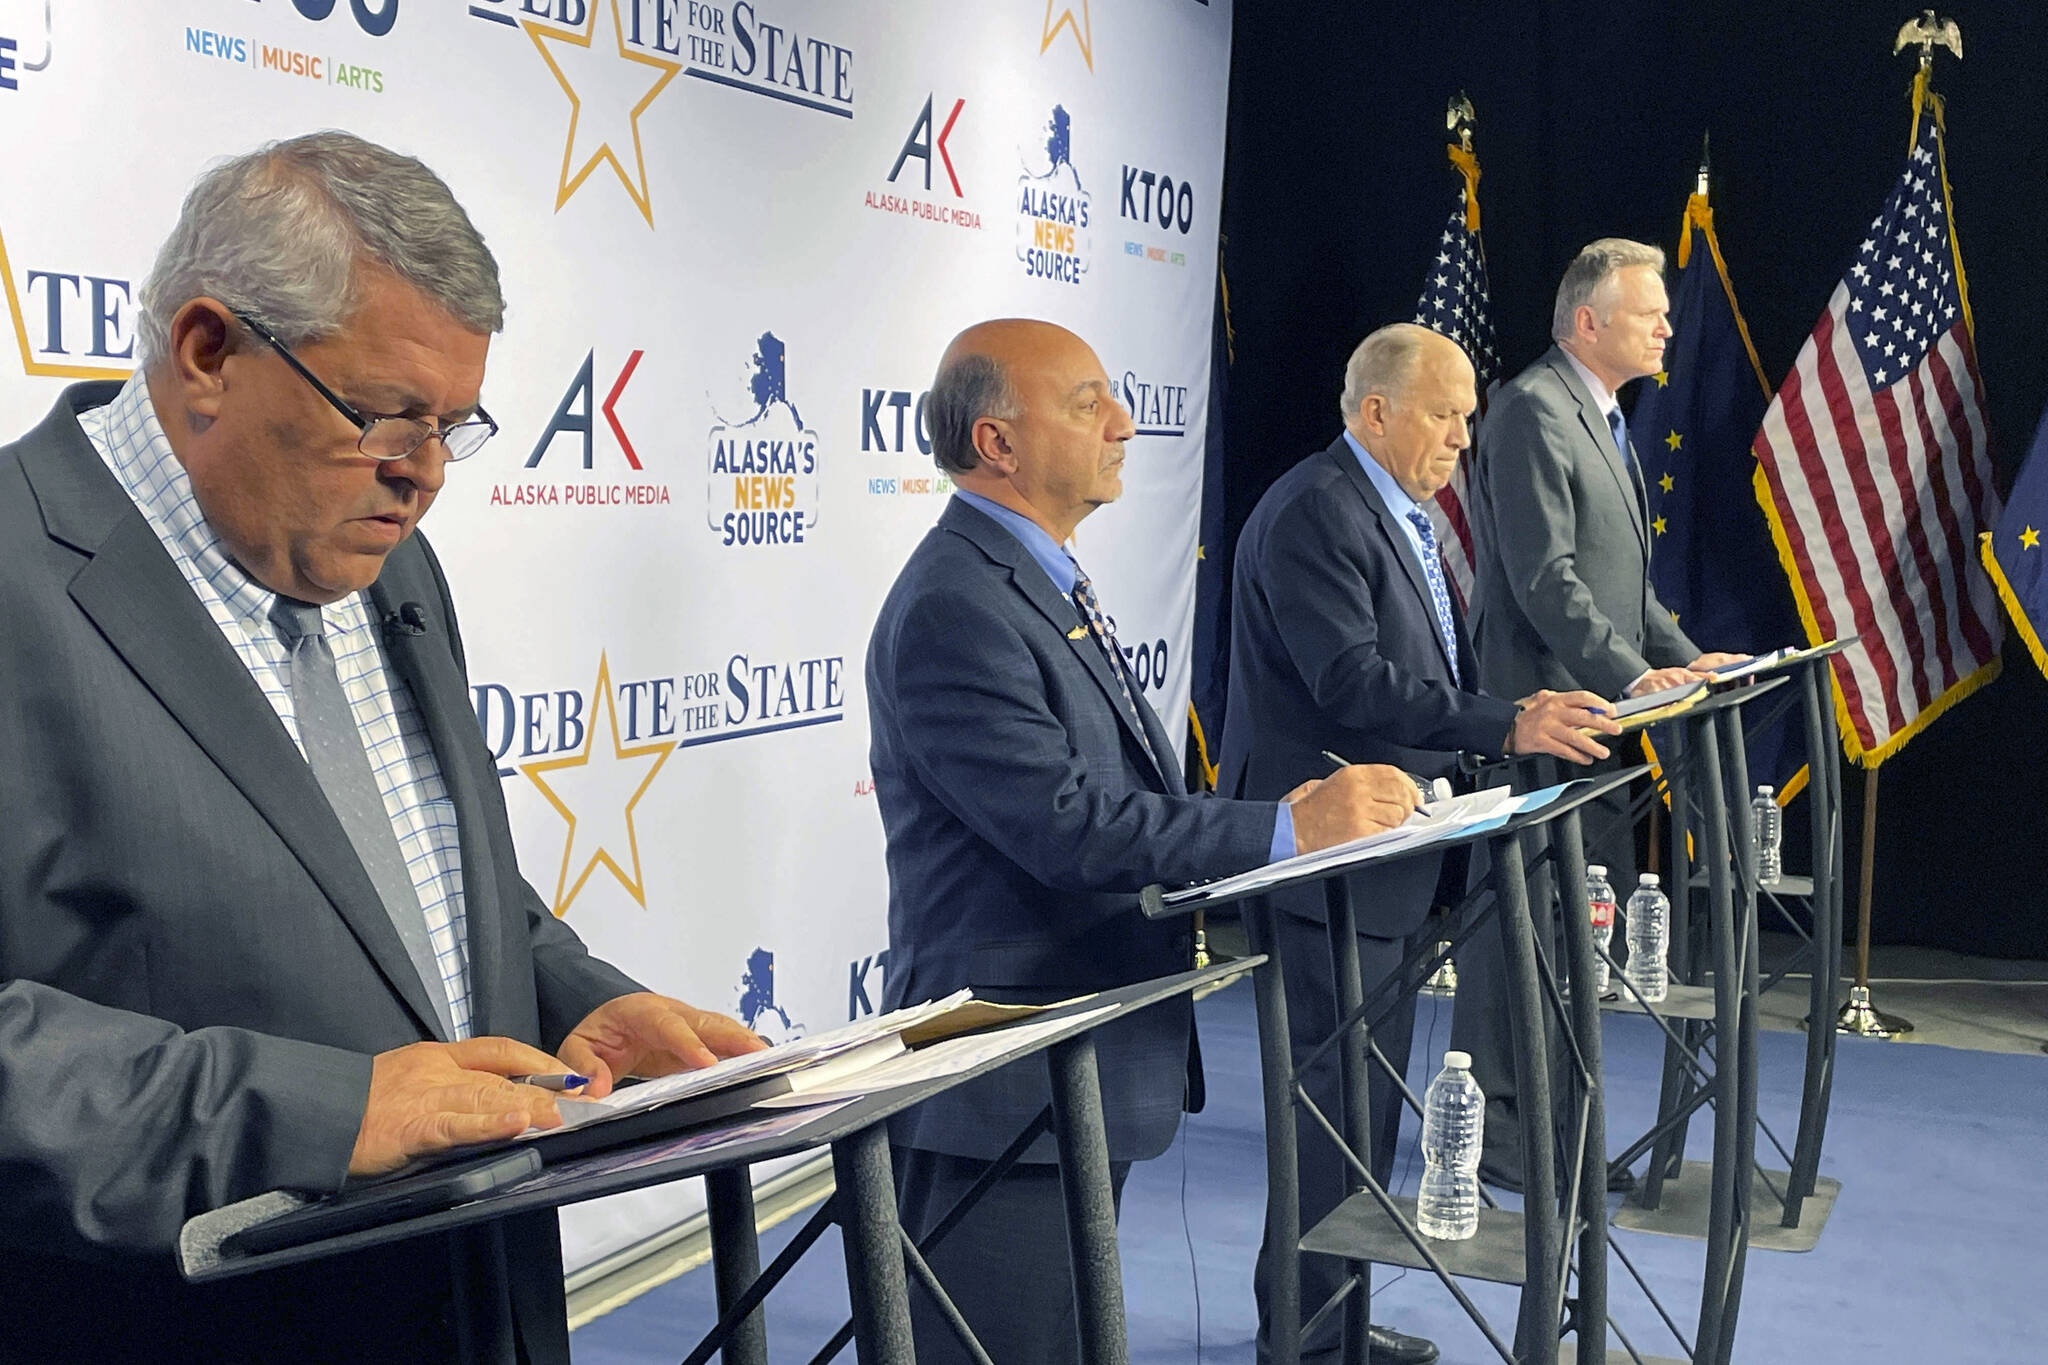 AP Photo / Mark Thiessen 
The four candidates for Alaska governor are shown preparing for a televised debate Wednesday, in Anchorage, ahead of the 2022 general election. From left are Republican Charlie Pierce; Democrat Les Gara; former Gov. Bill Walker, an independent; and Gov. Mike Dunleavy, a Republican.